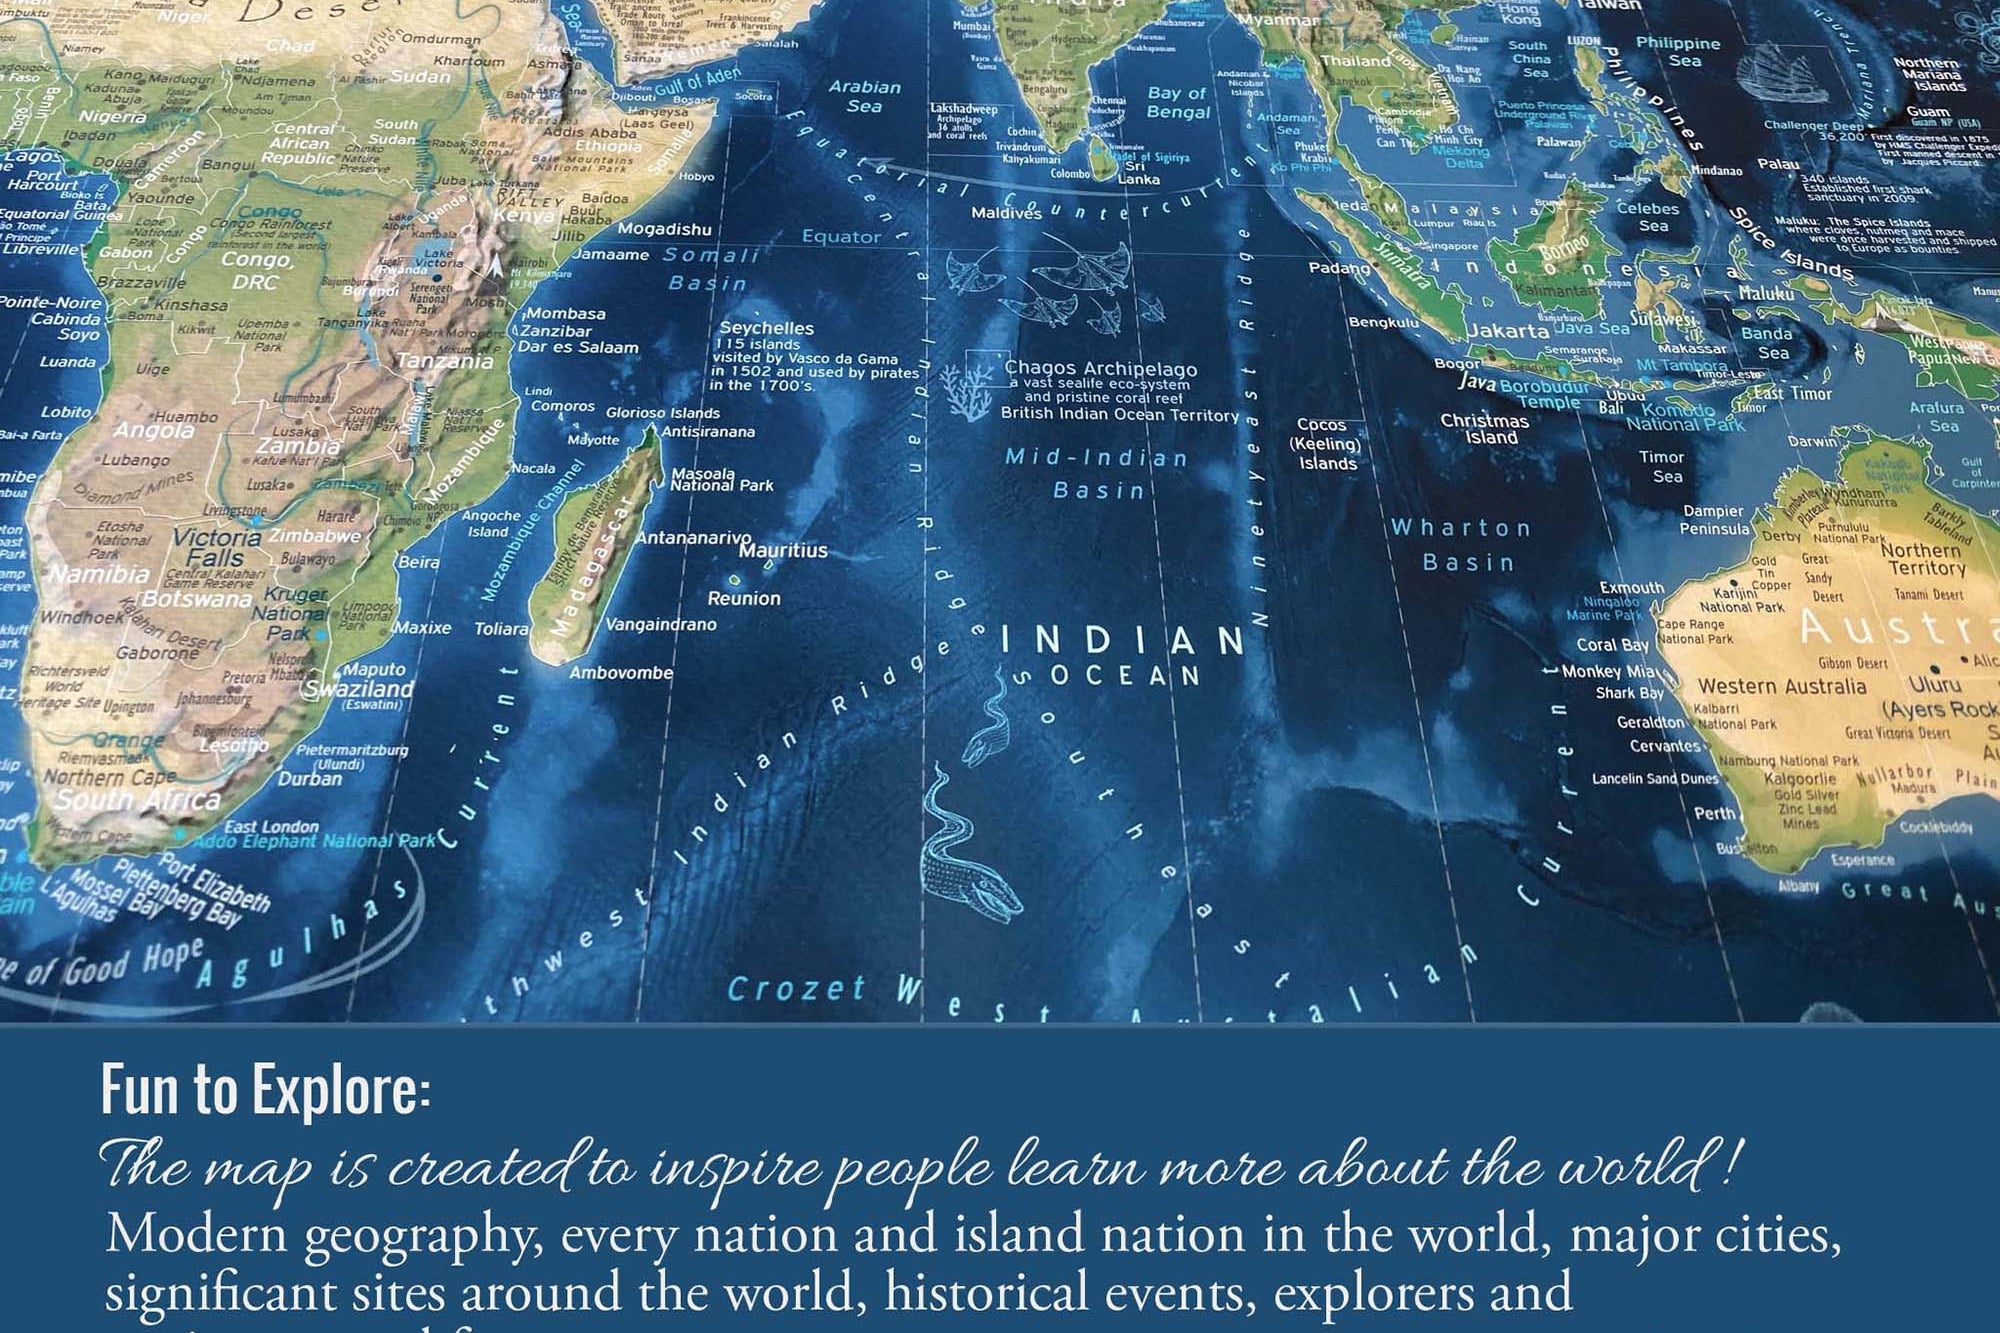 Historical details for world explorers on our world pin maps help you learn about the earth!